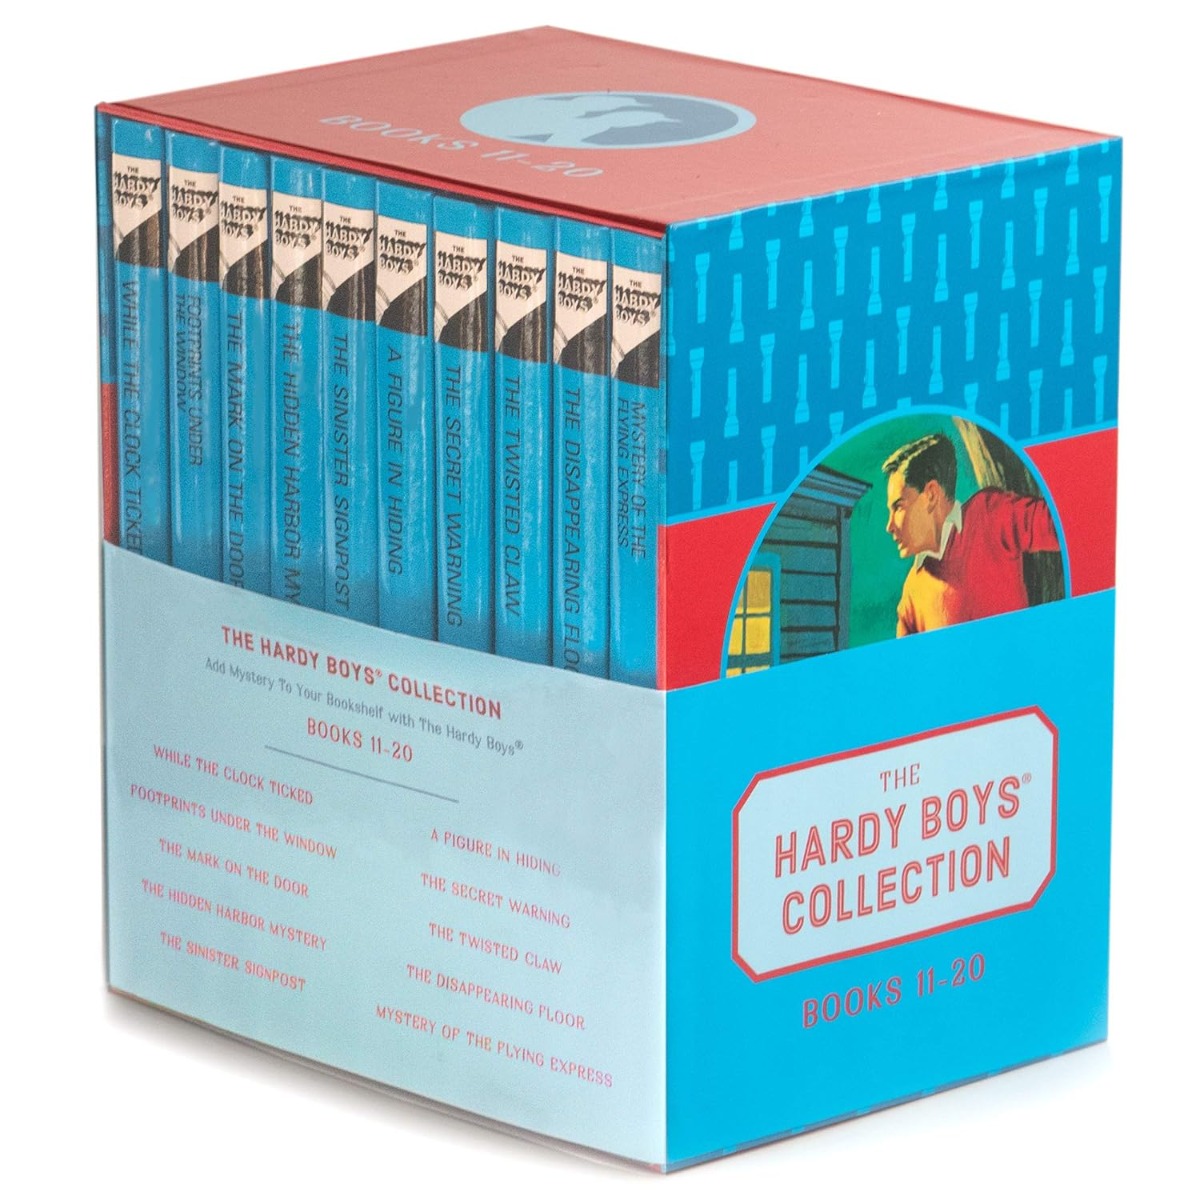 The Hardy Boys Collection: Books 11-20 [Hardcover Book Set]